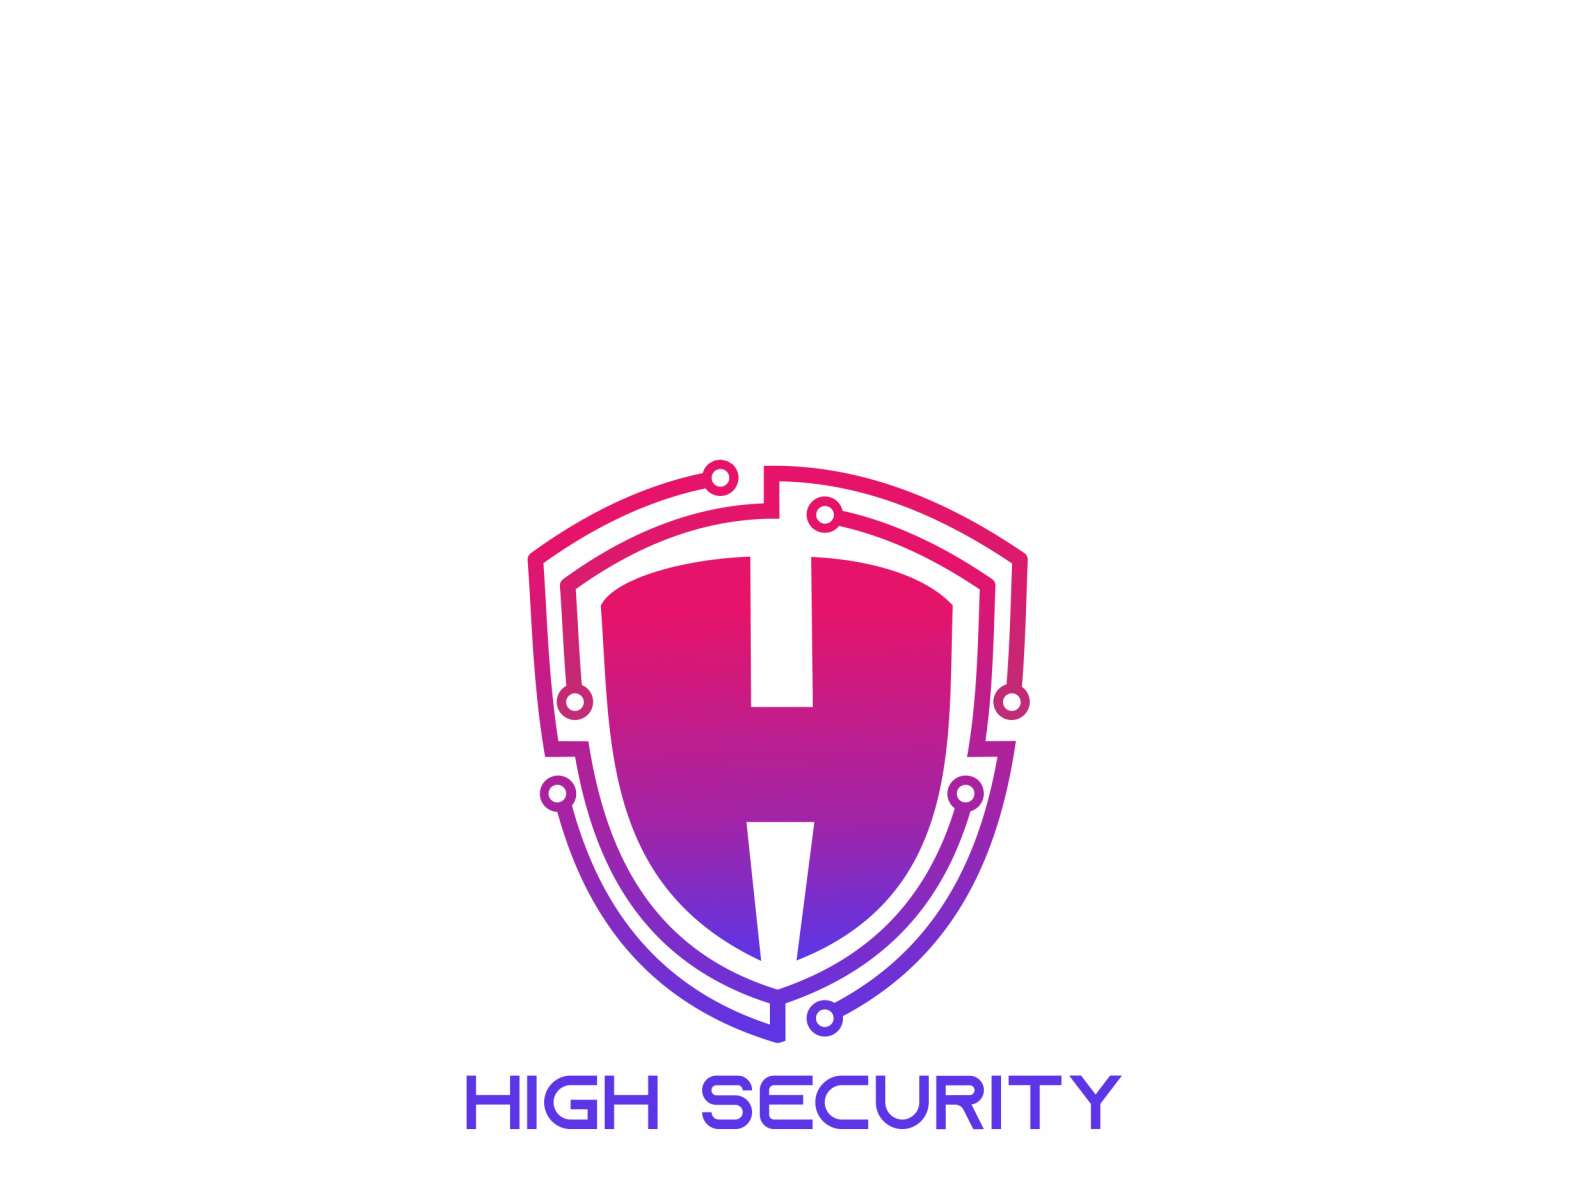 Logo for Cyber Security product by Hardiansyah Lapalilo on Dribbble